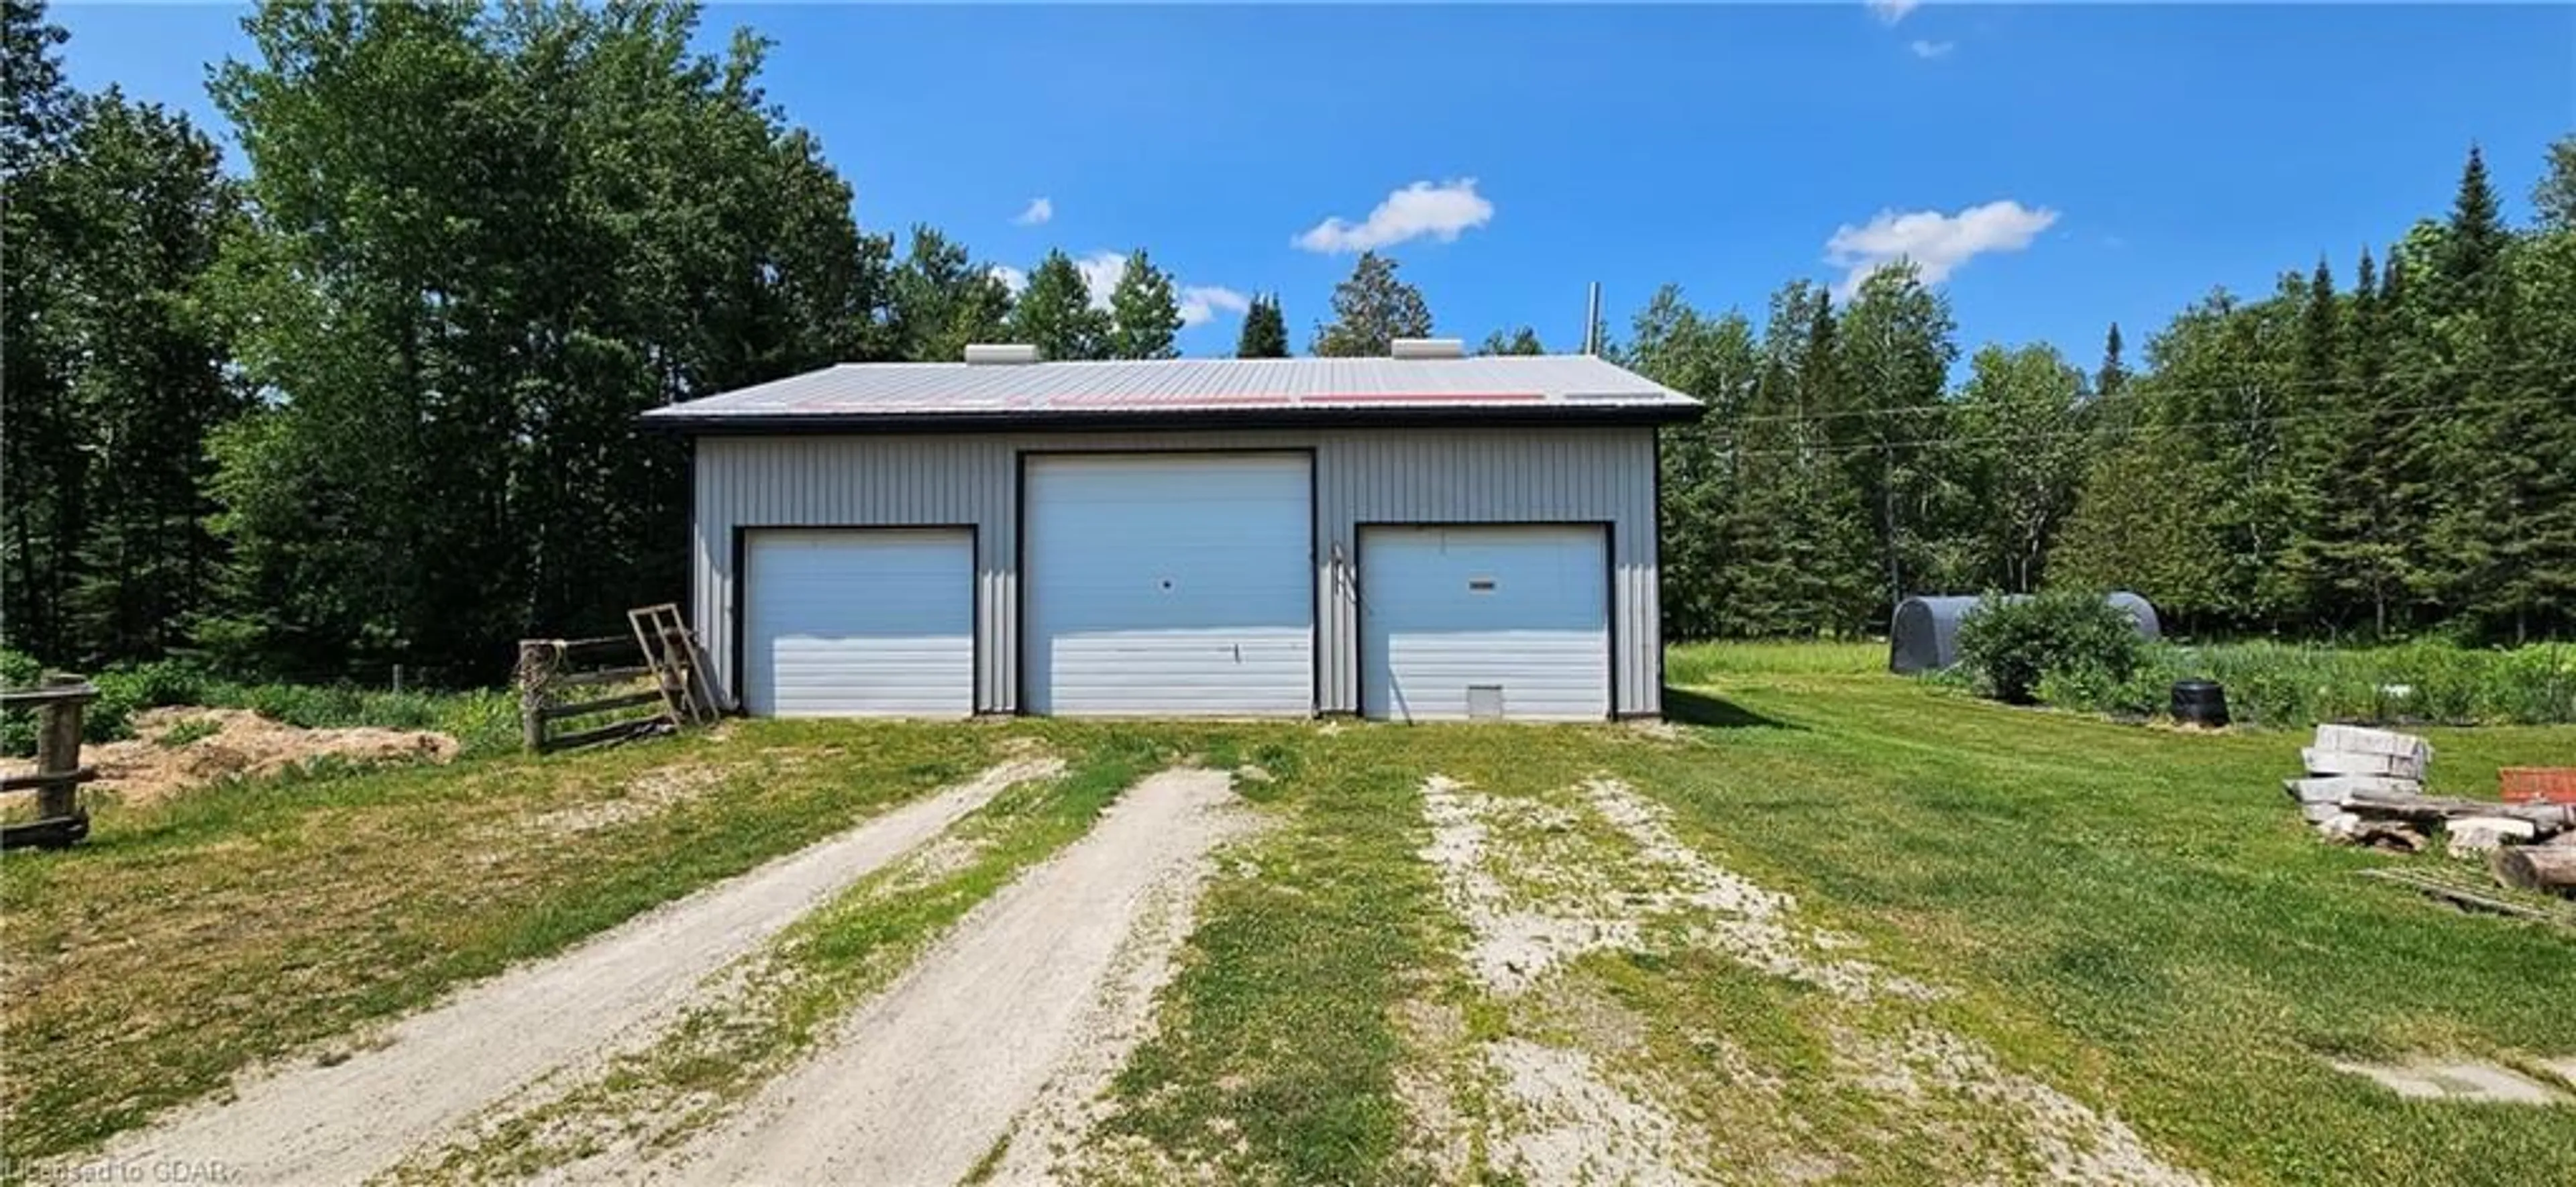 Shed for 111724 Grey 14 Rd, Conn Ontario N0G 1N0